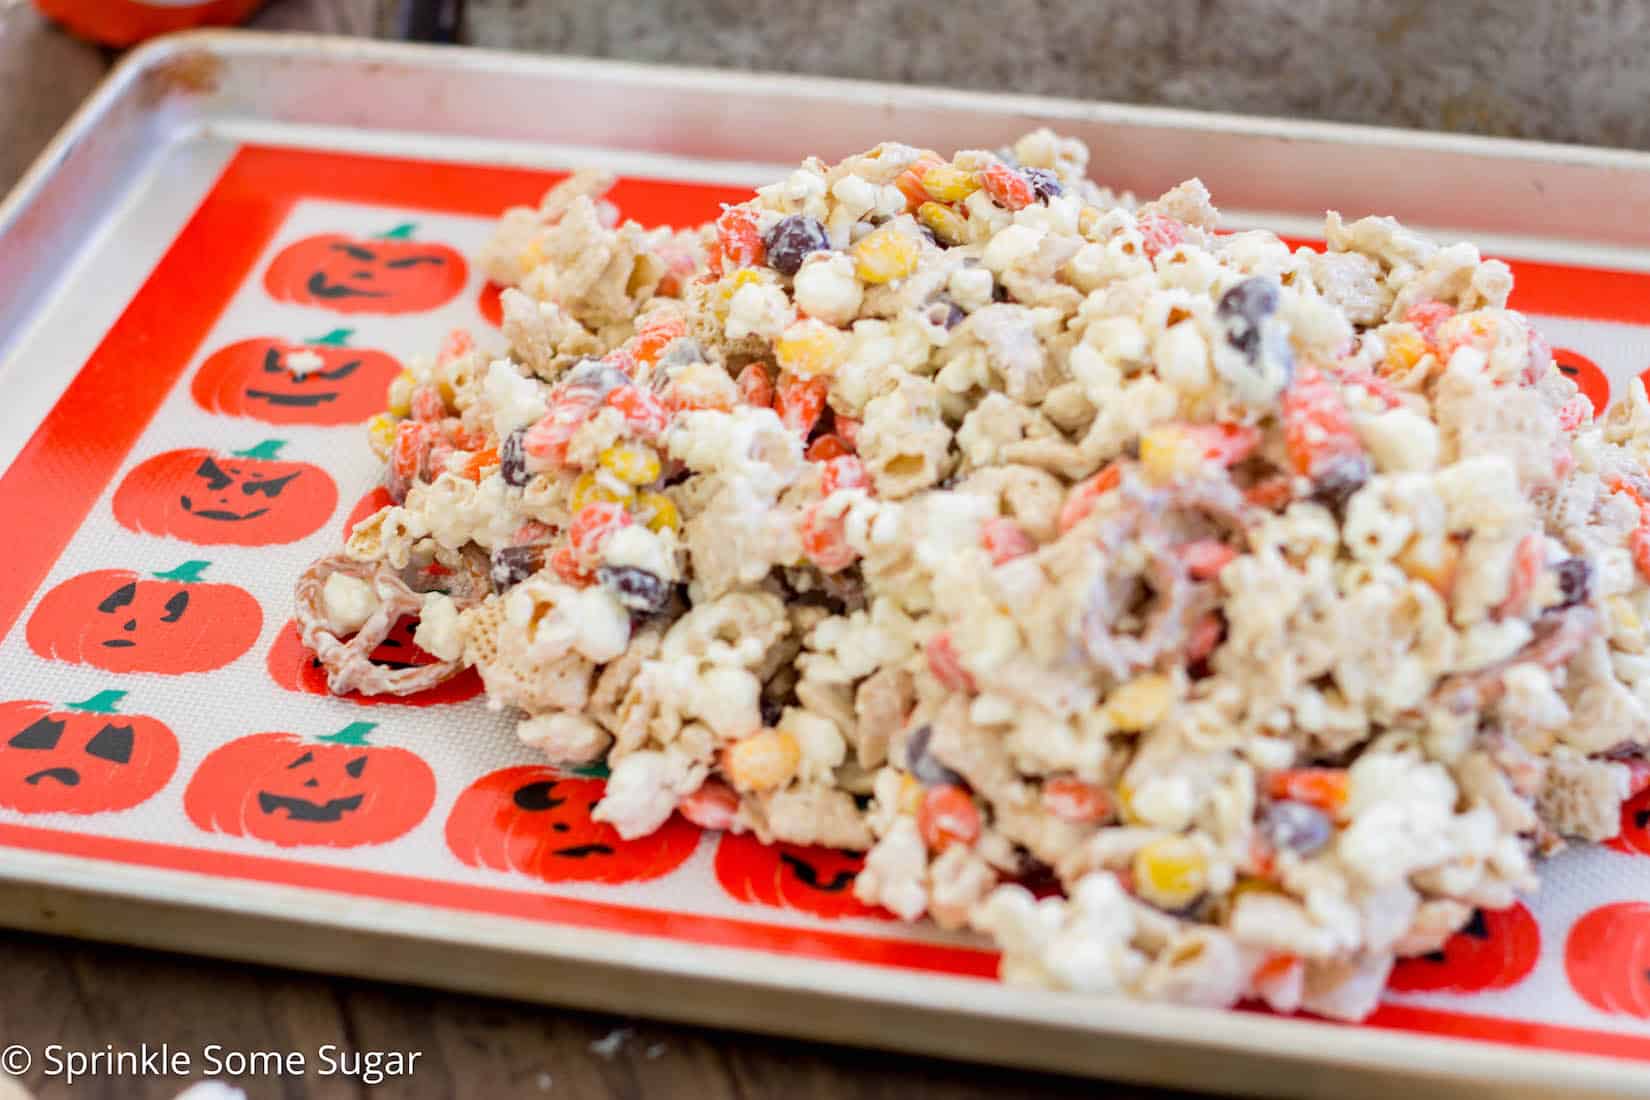 Halloween Munch - A super fun snack mix perfect for Halloween! The perfect treat for the kids to help out.